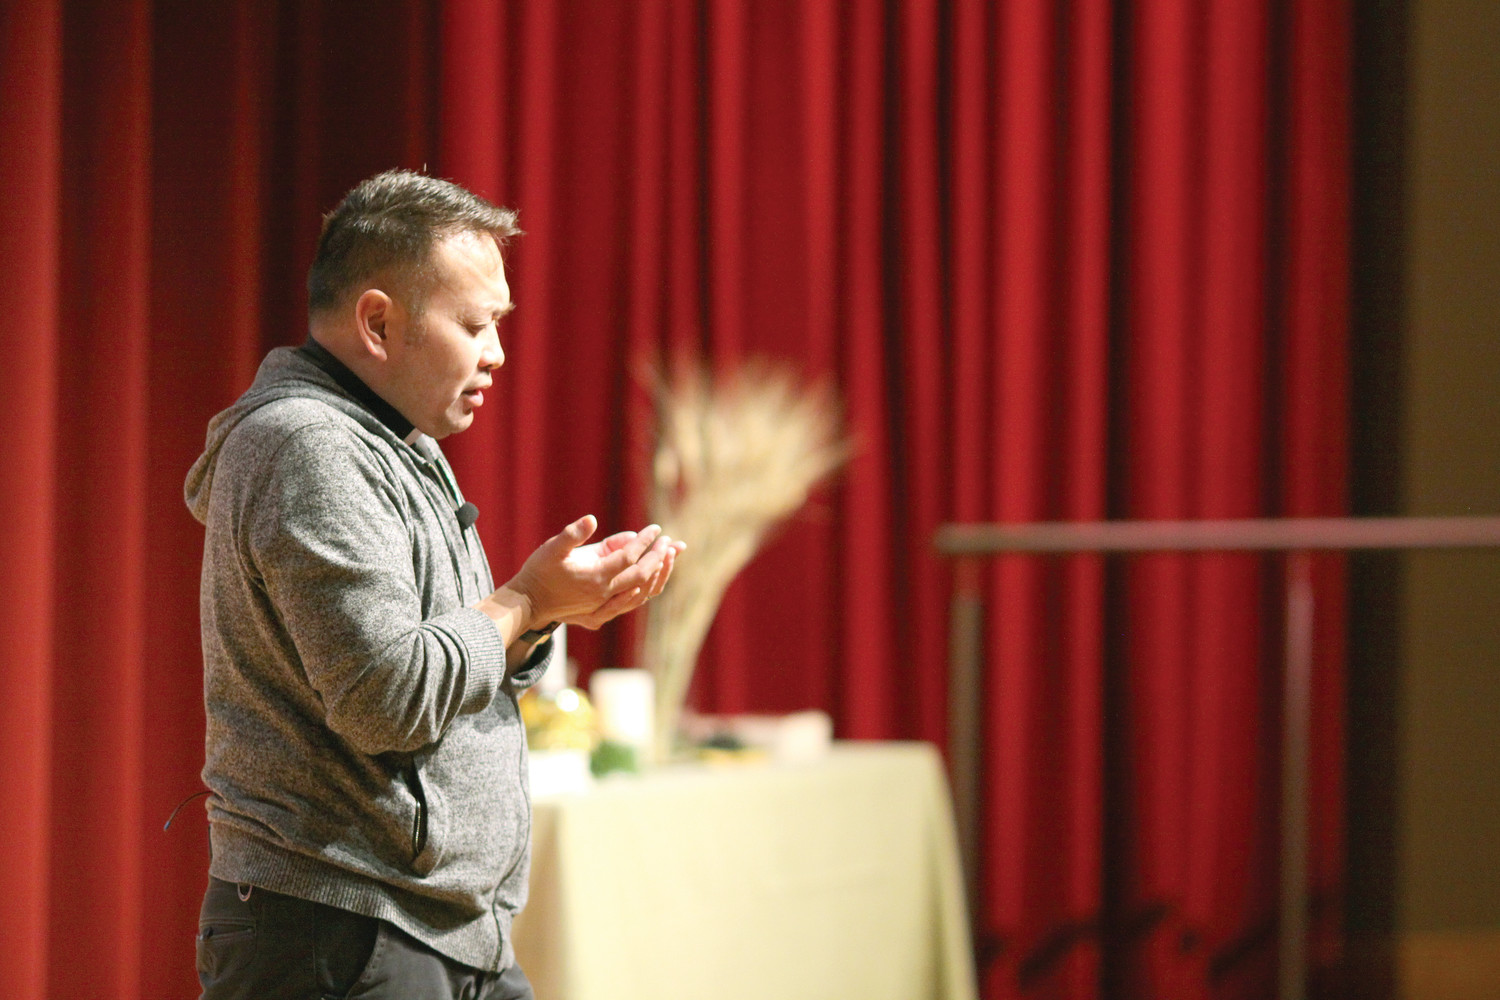 Father Leo Patalinghug, a traveling speaker, chef and priest known for his ministry with Grace Before Meals, leads students in prayer during a presentation at McVinney Auditorium on Friday, December 1.